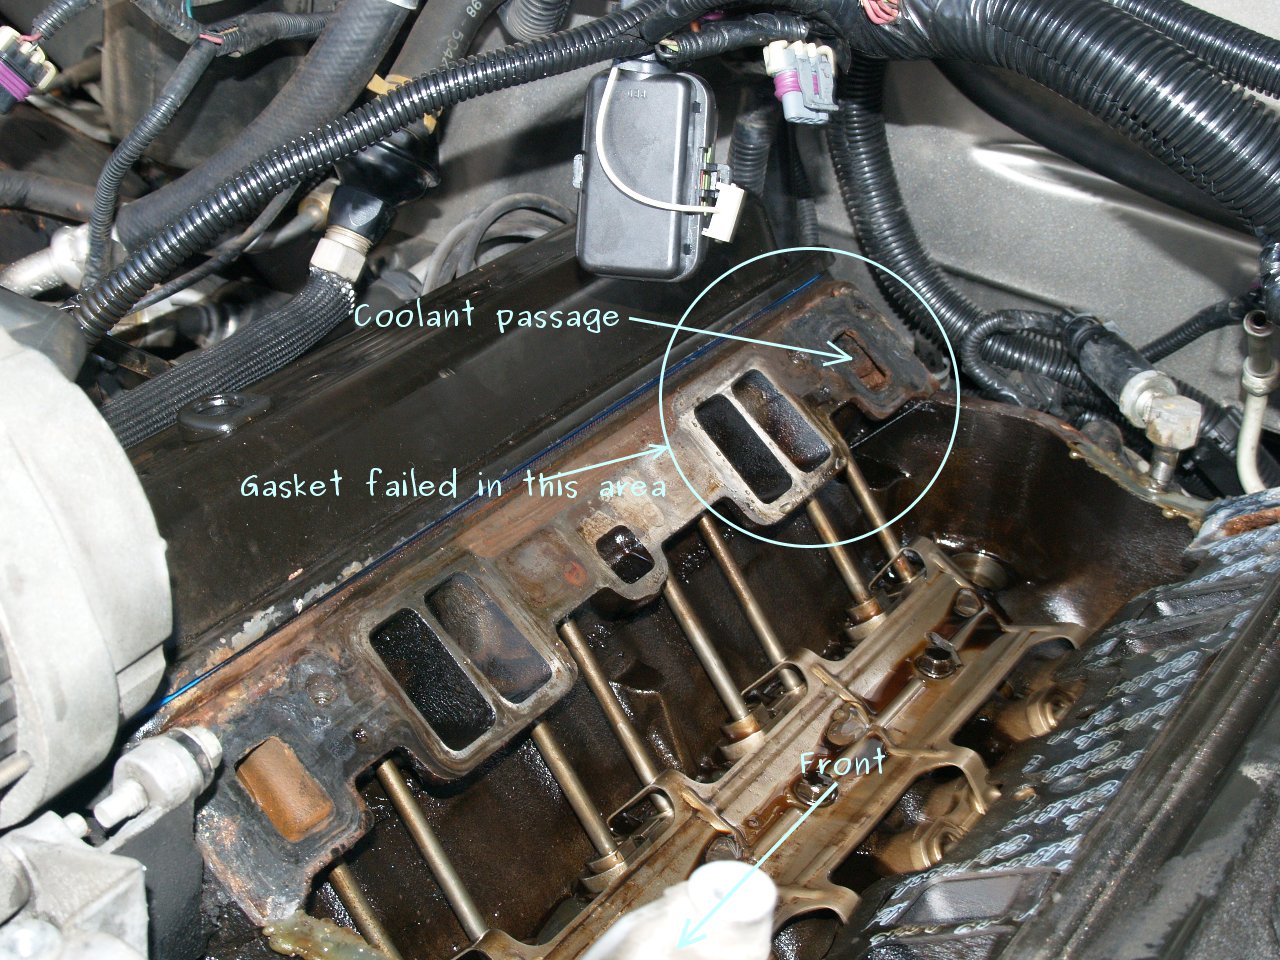 See P267C in engine